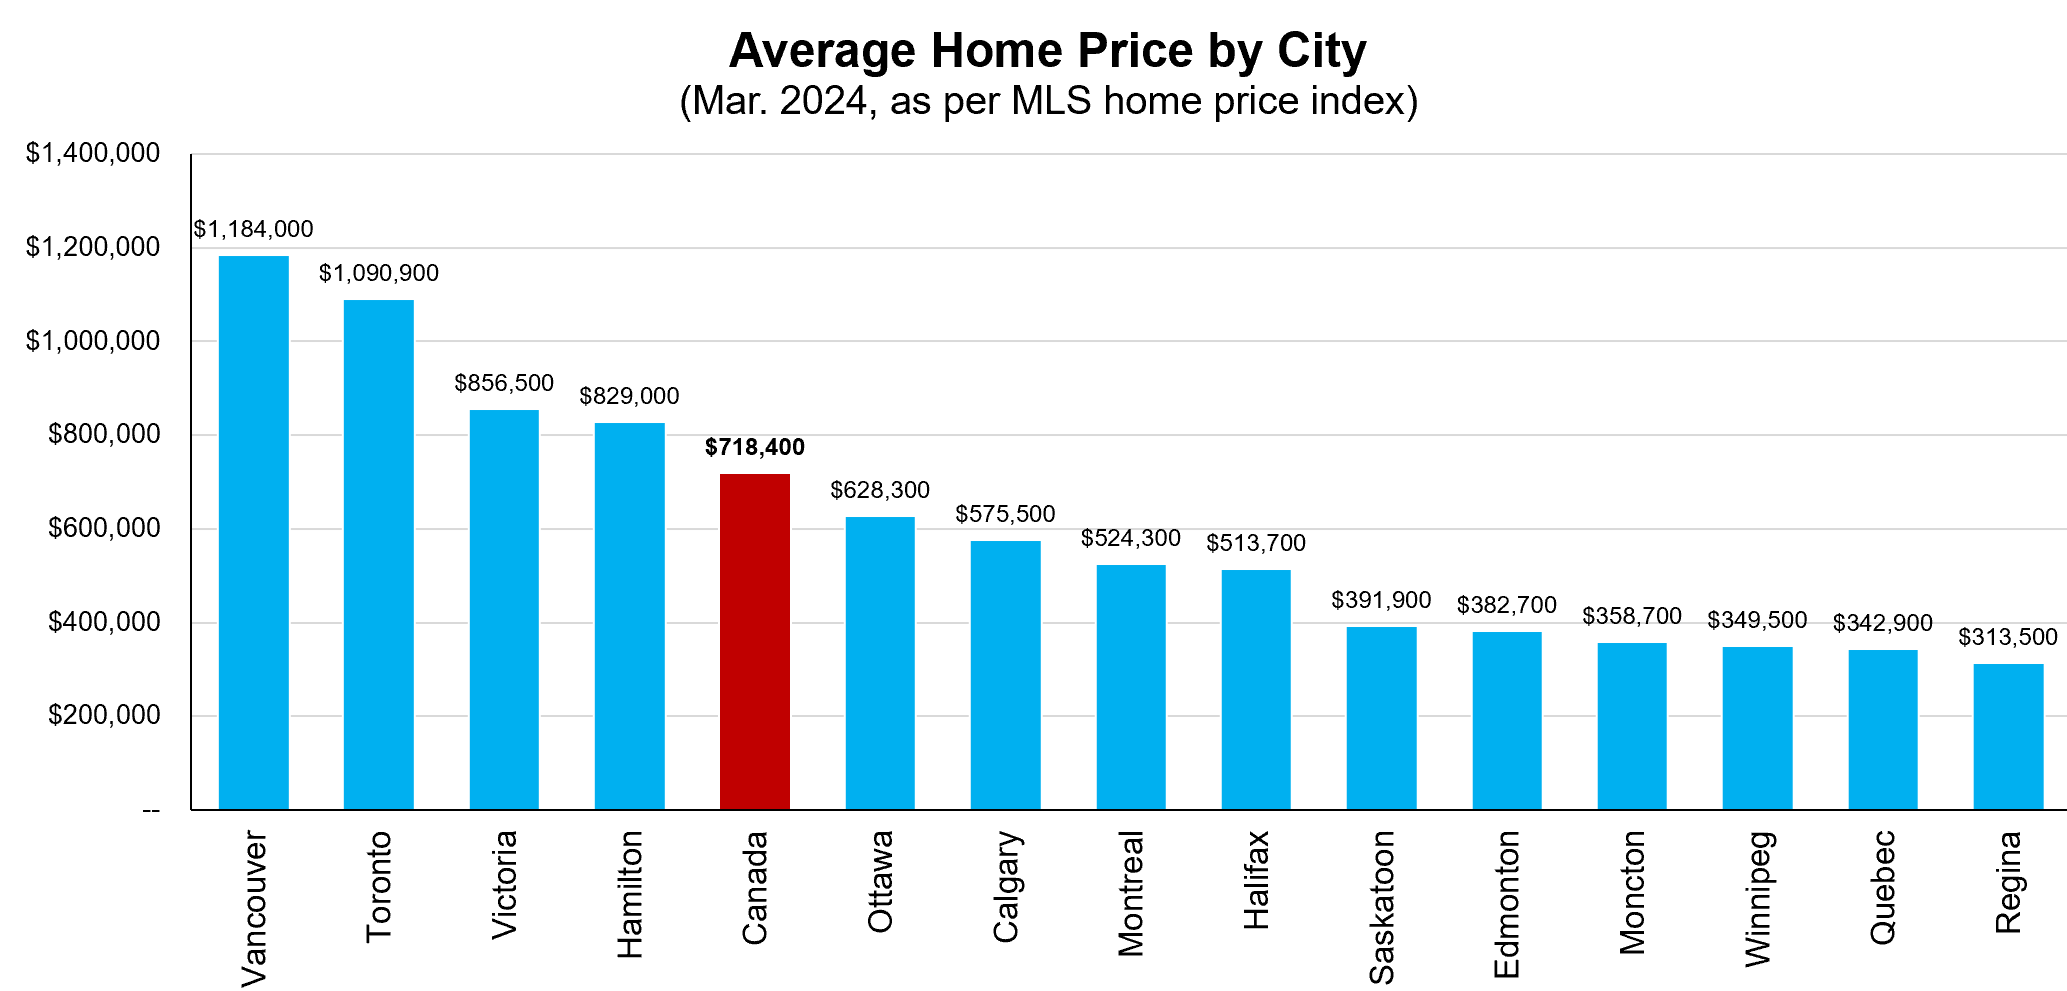 Canadian home prices by city in 2024